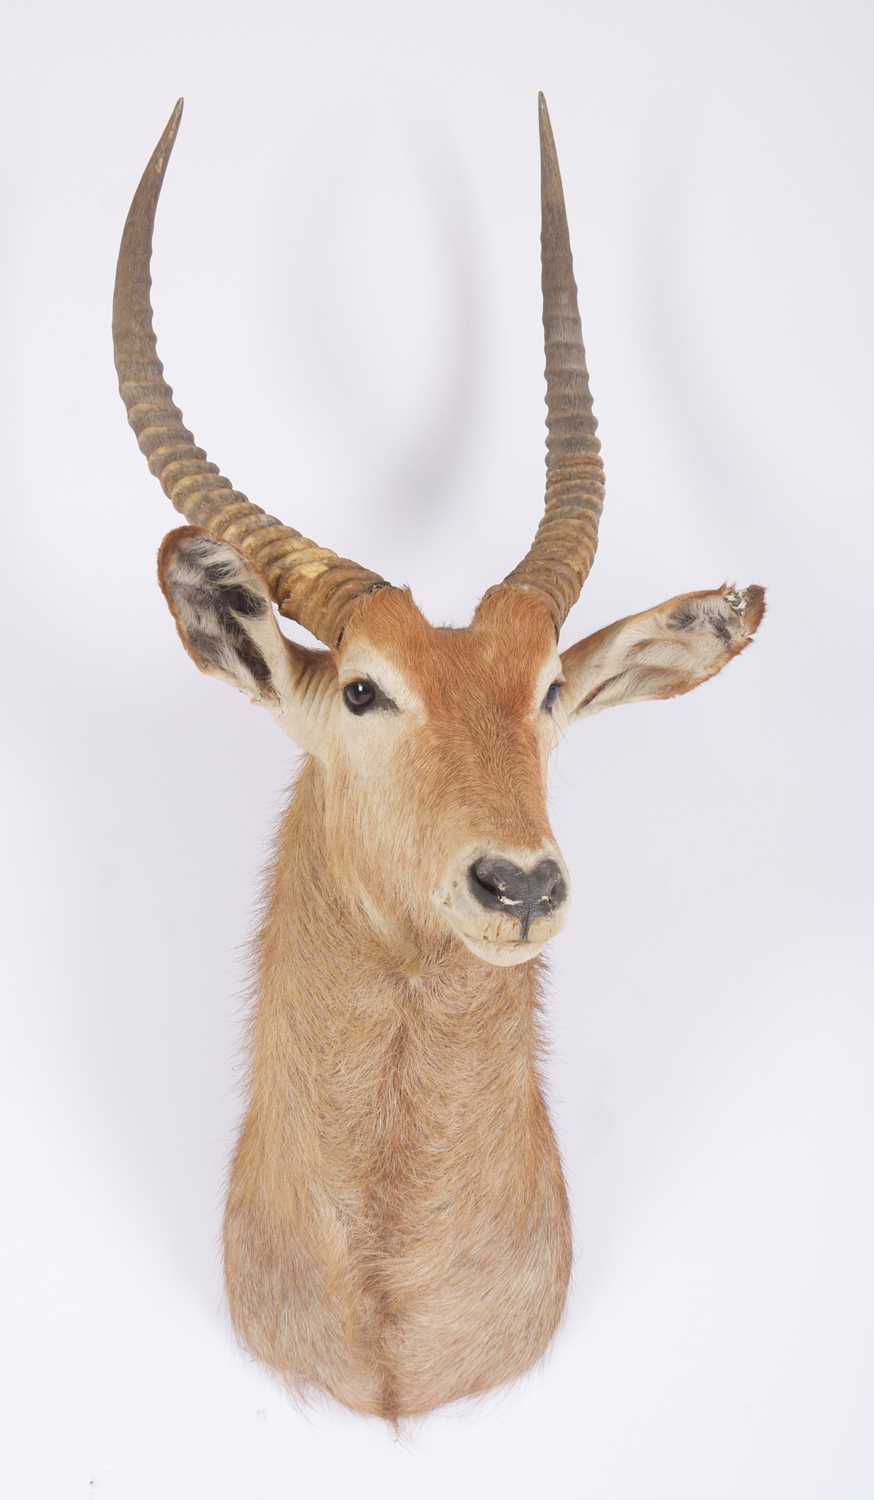 Taxidermy: Common Waterbuck (Kobus ellipsiprymnus), circa late 20th century, South Africa, adult - Image 2 of 3